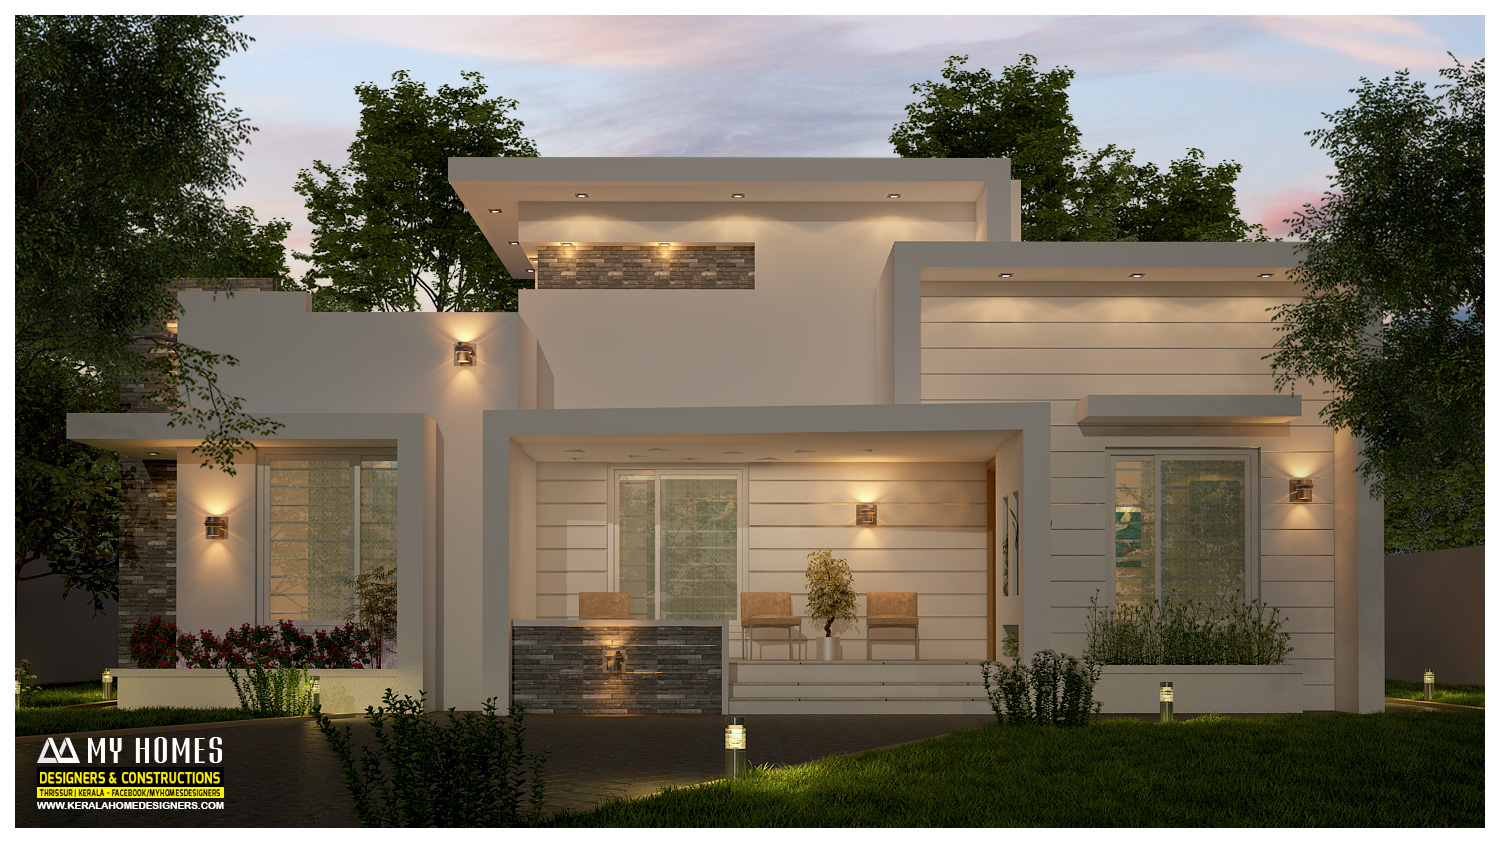 Kerala Homes Designs And Plans Photos, House Plans With Photos Kerala